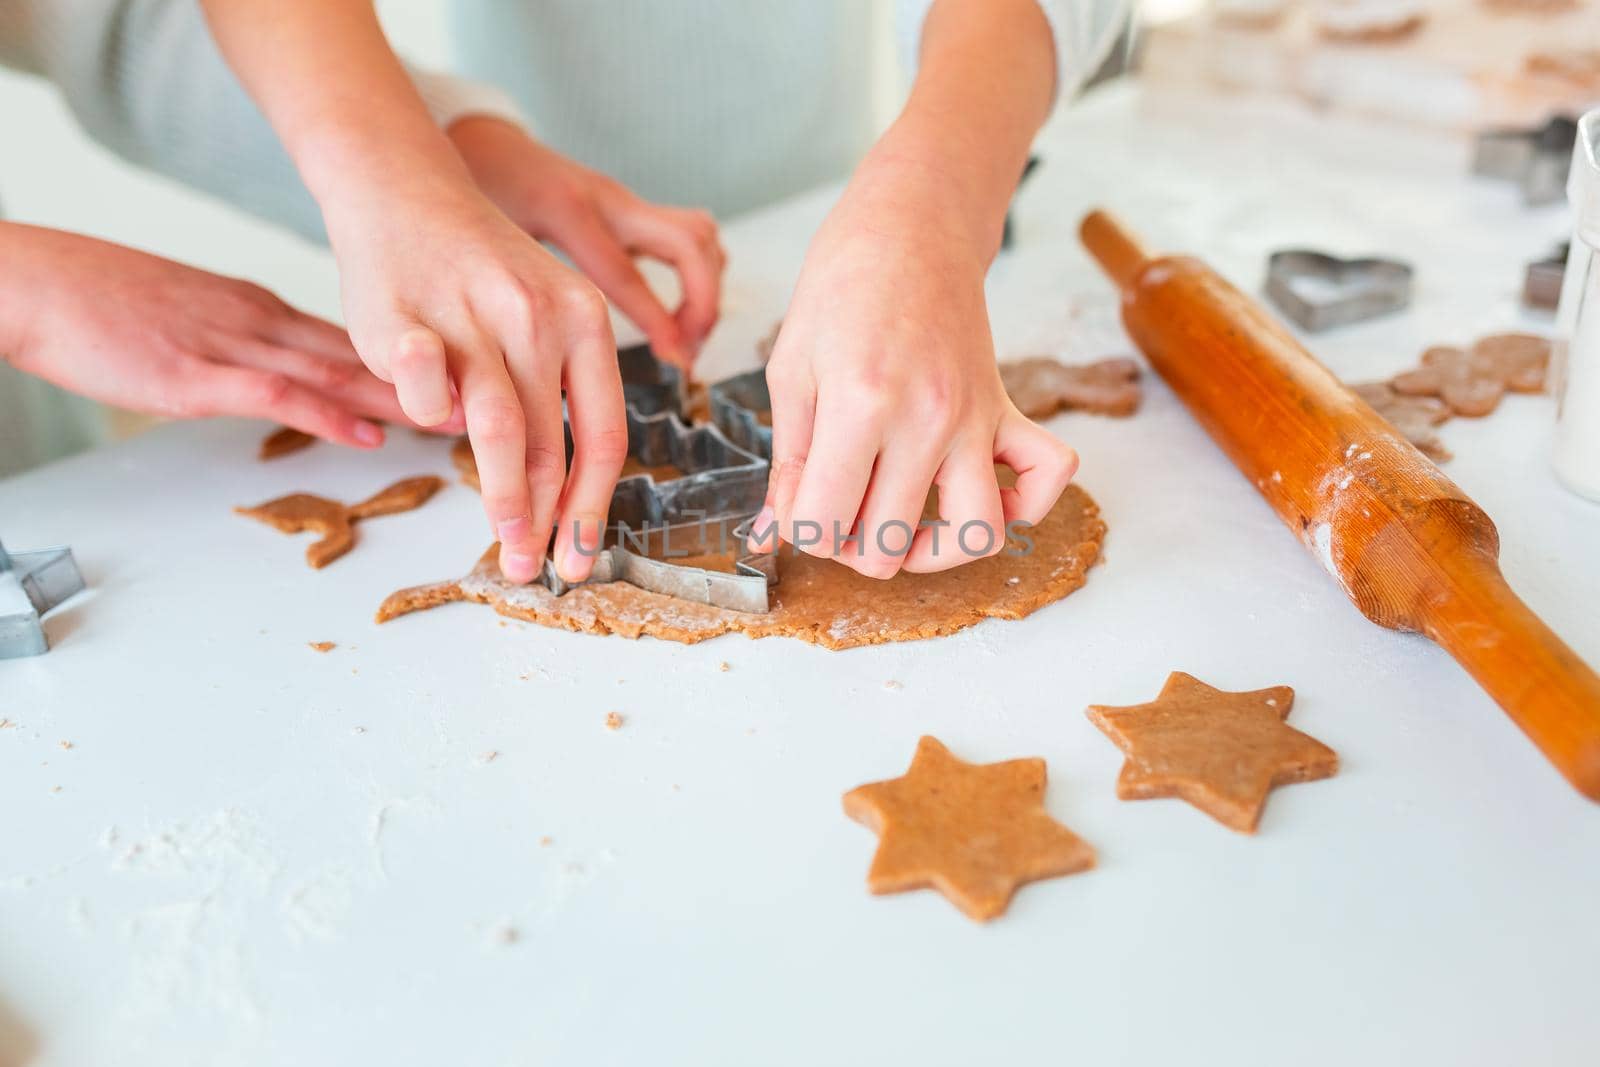 Kid's hands making gingerbread, cutting cookies of gingerbread dough. Festive food, cooking process, family culinary, Christmas and New Year traditions concept by Len44ik